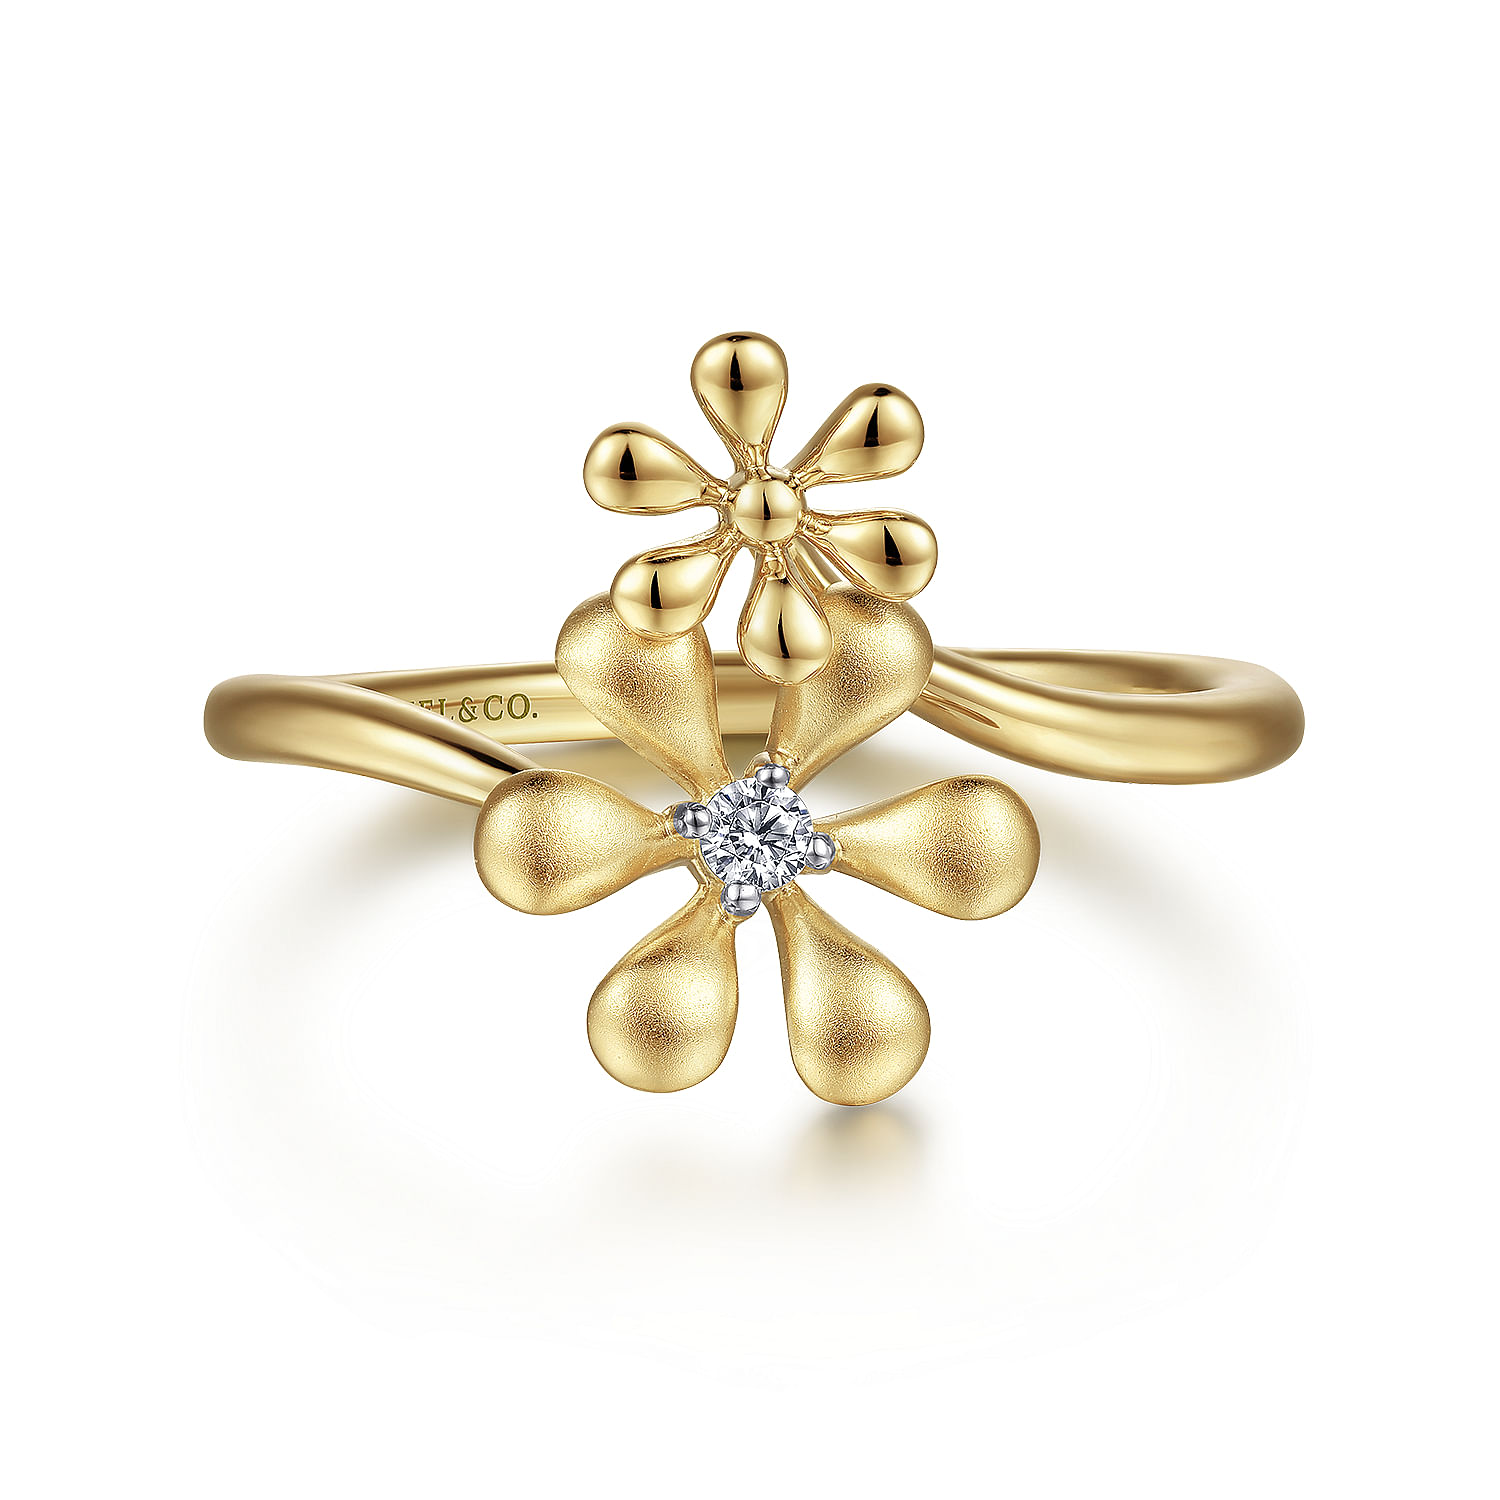 14K Yellow Gold Floral Diamond Bypass Ring